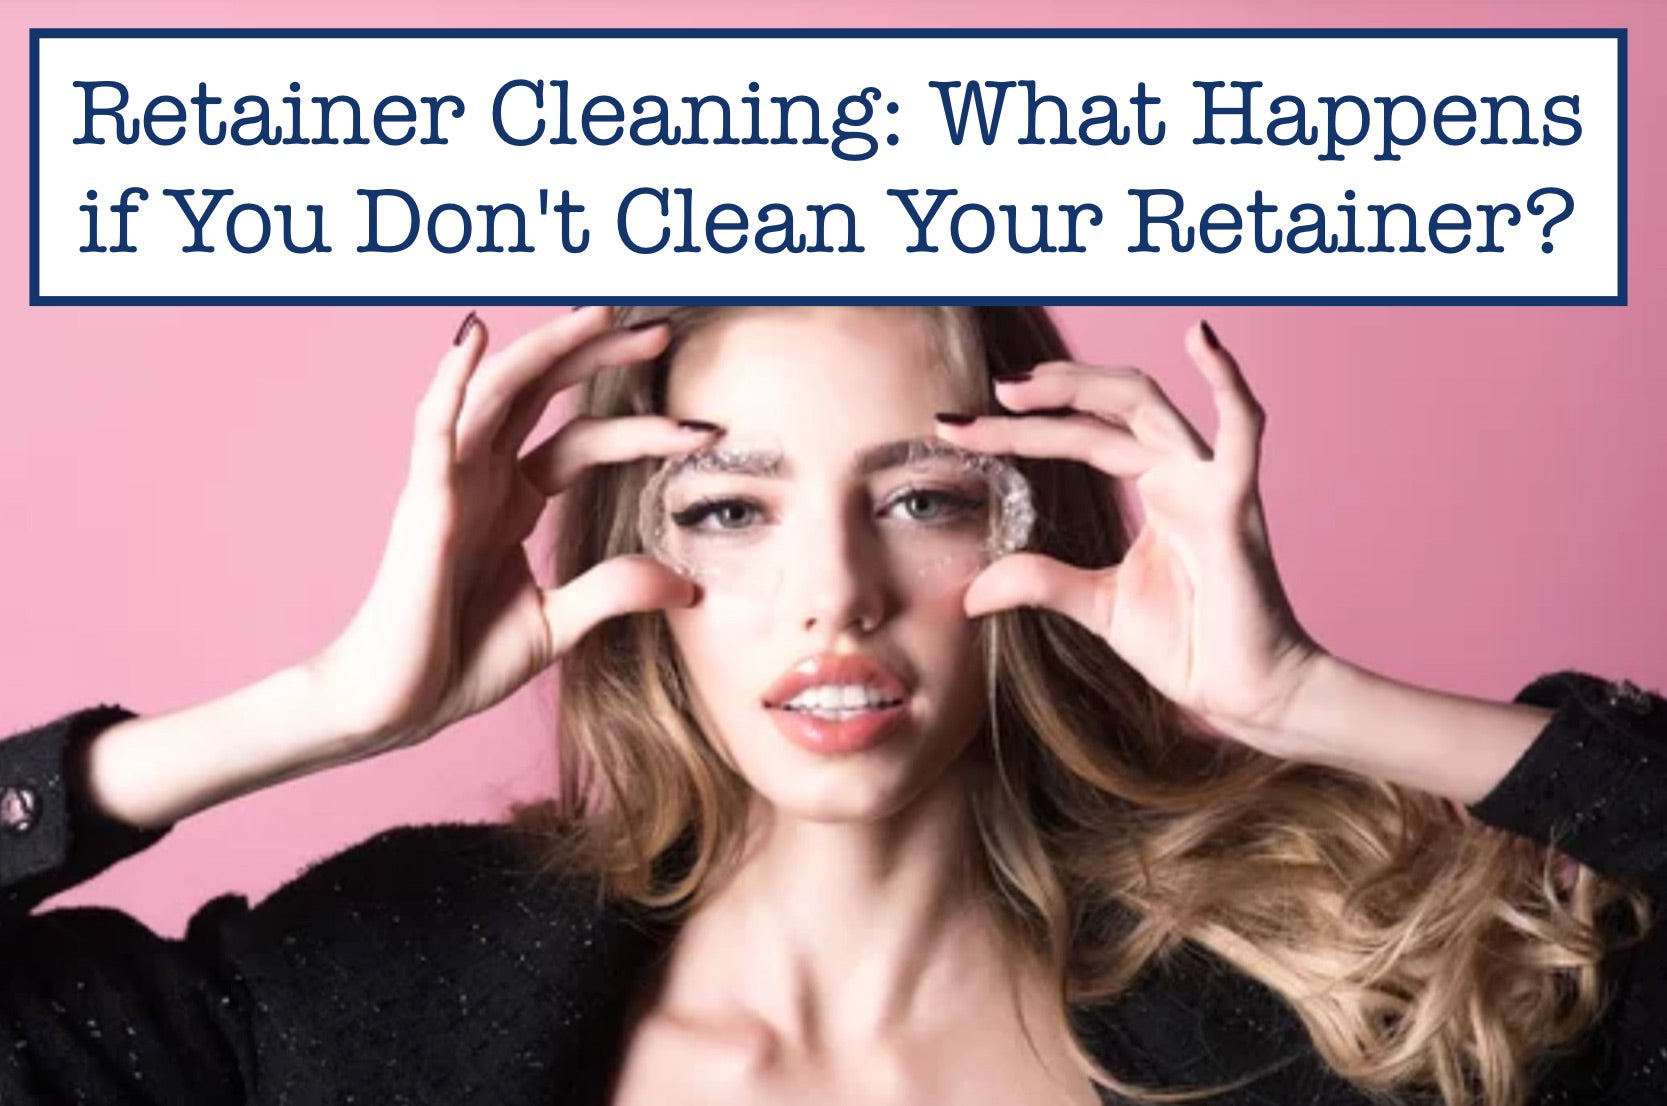 Retainer Cleaning: What Happens if You Don't Clean Your Retainer?